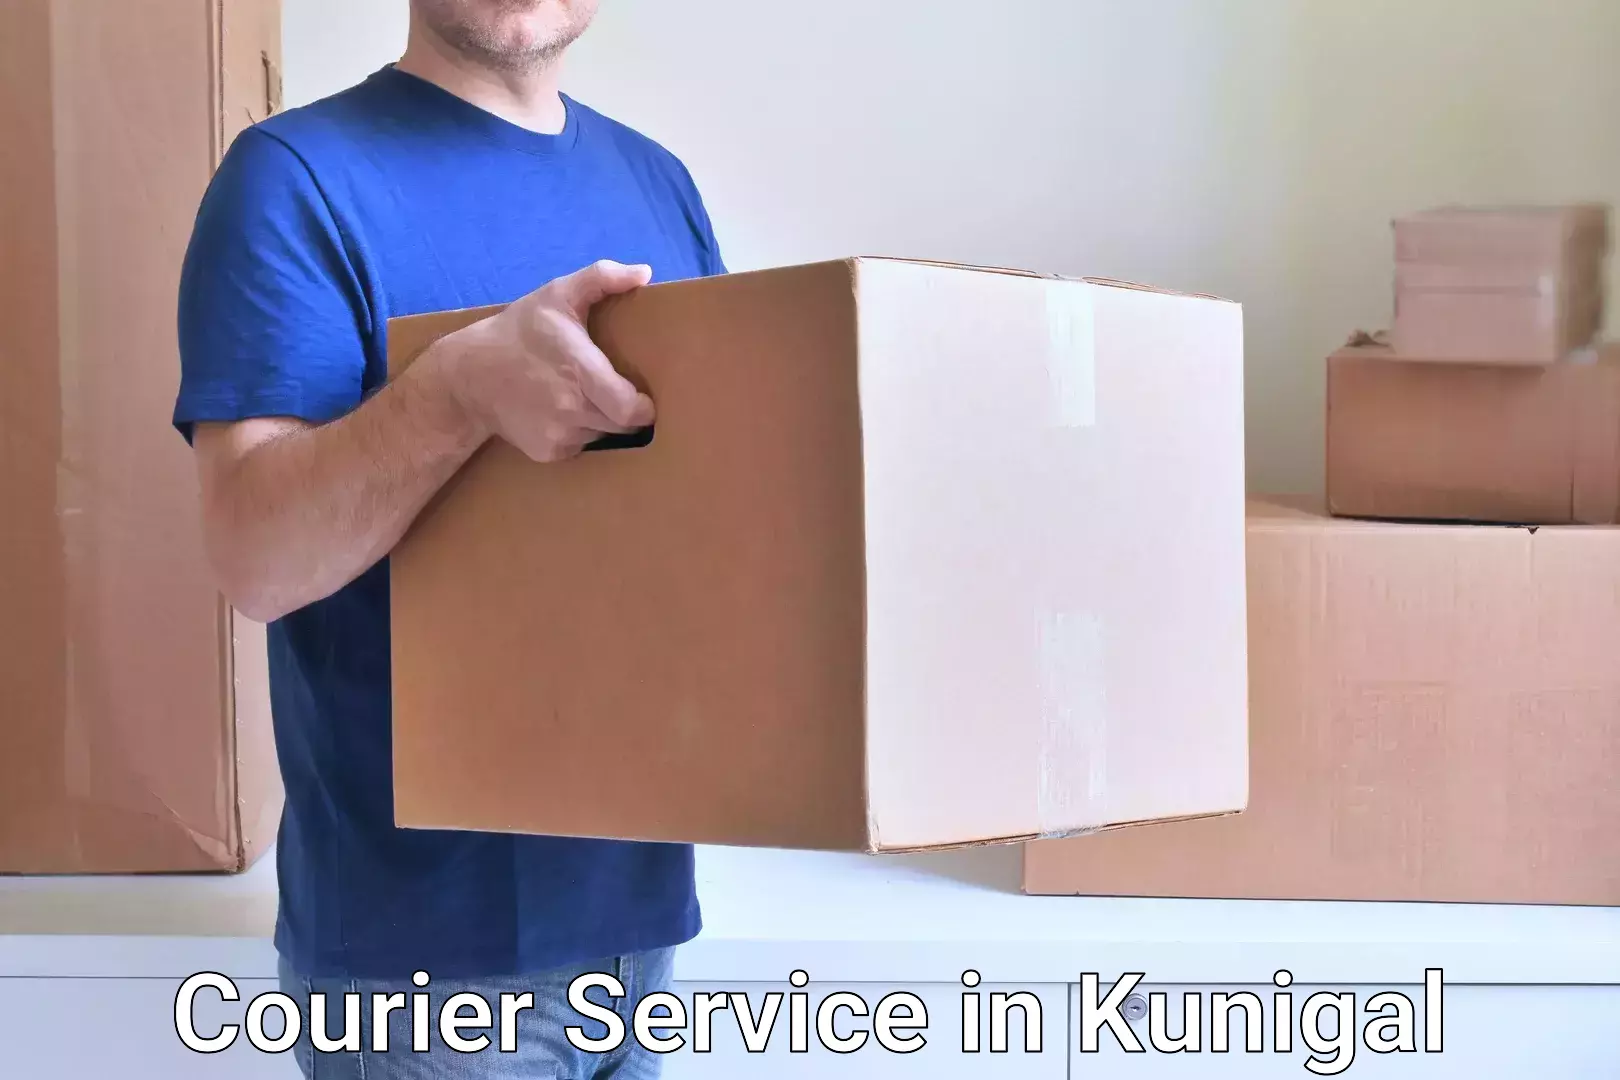 Optimized shipping services in Kunigal